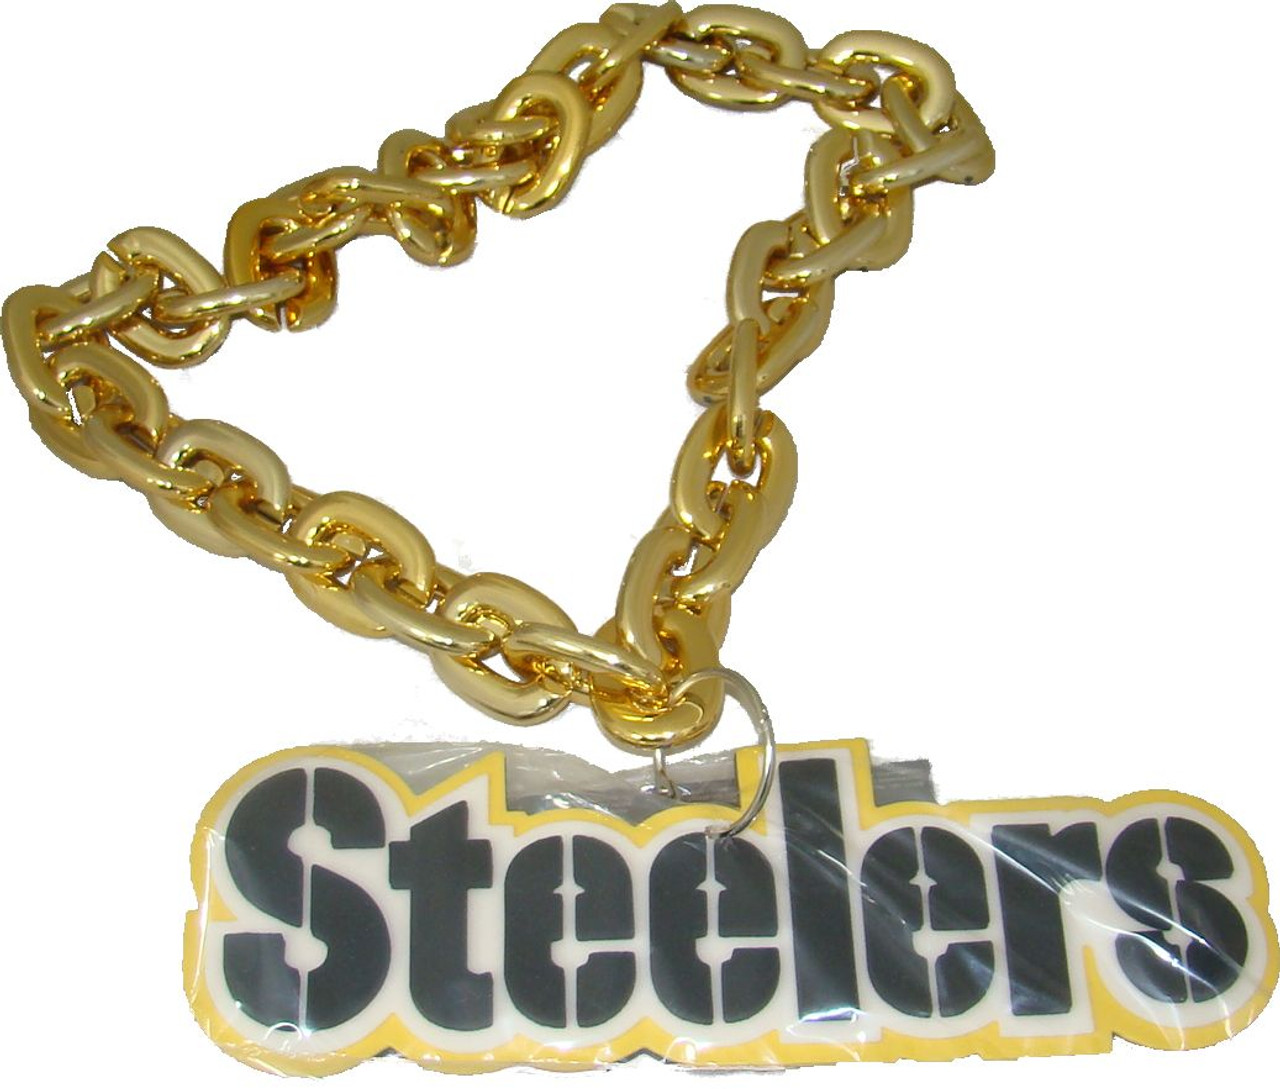 Fanfave Pittsburgh Steelers Logo NFL Touchdown Fan Chain 3D Foam Necklace, Size 10 | Collectible Supplies